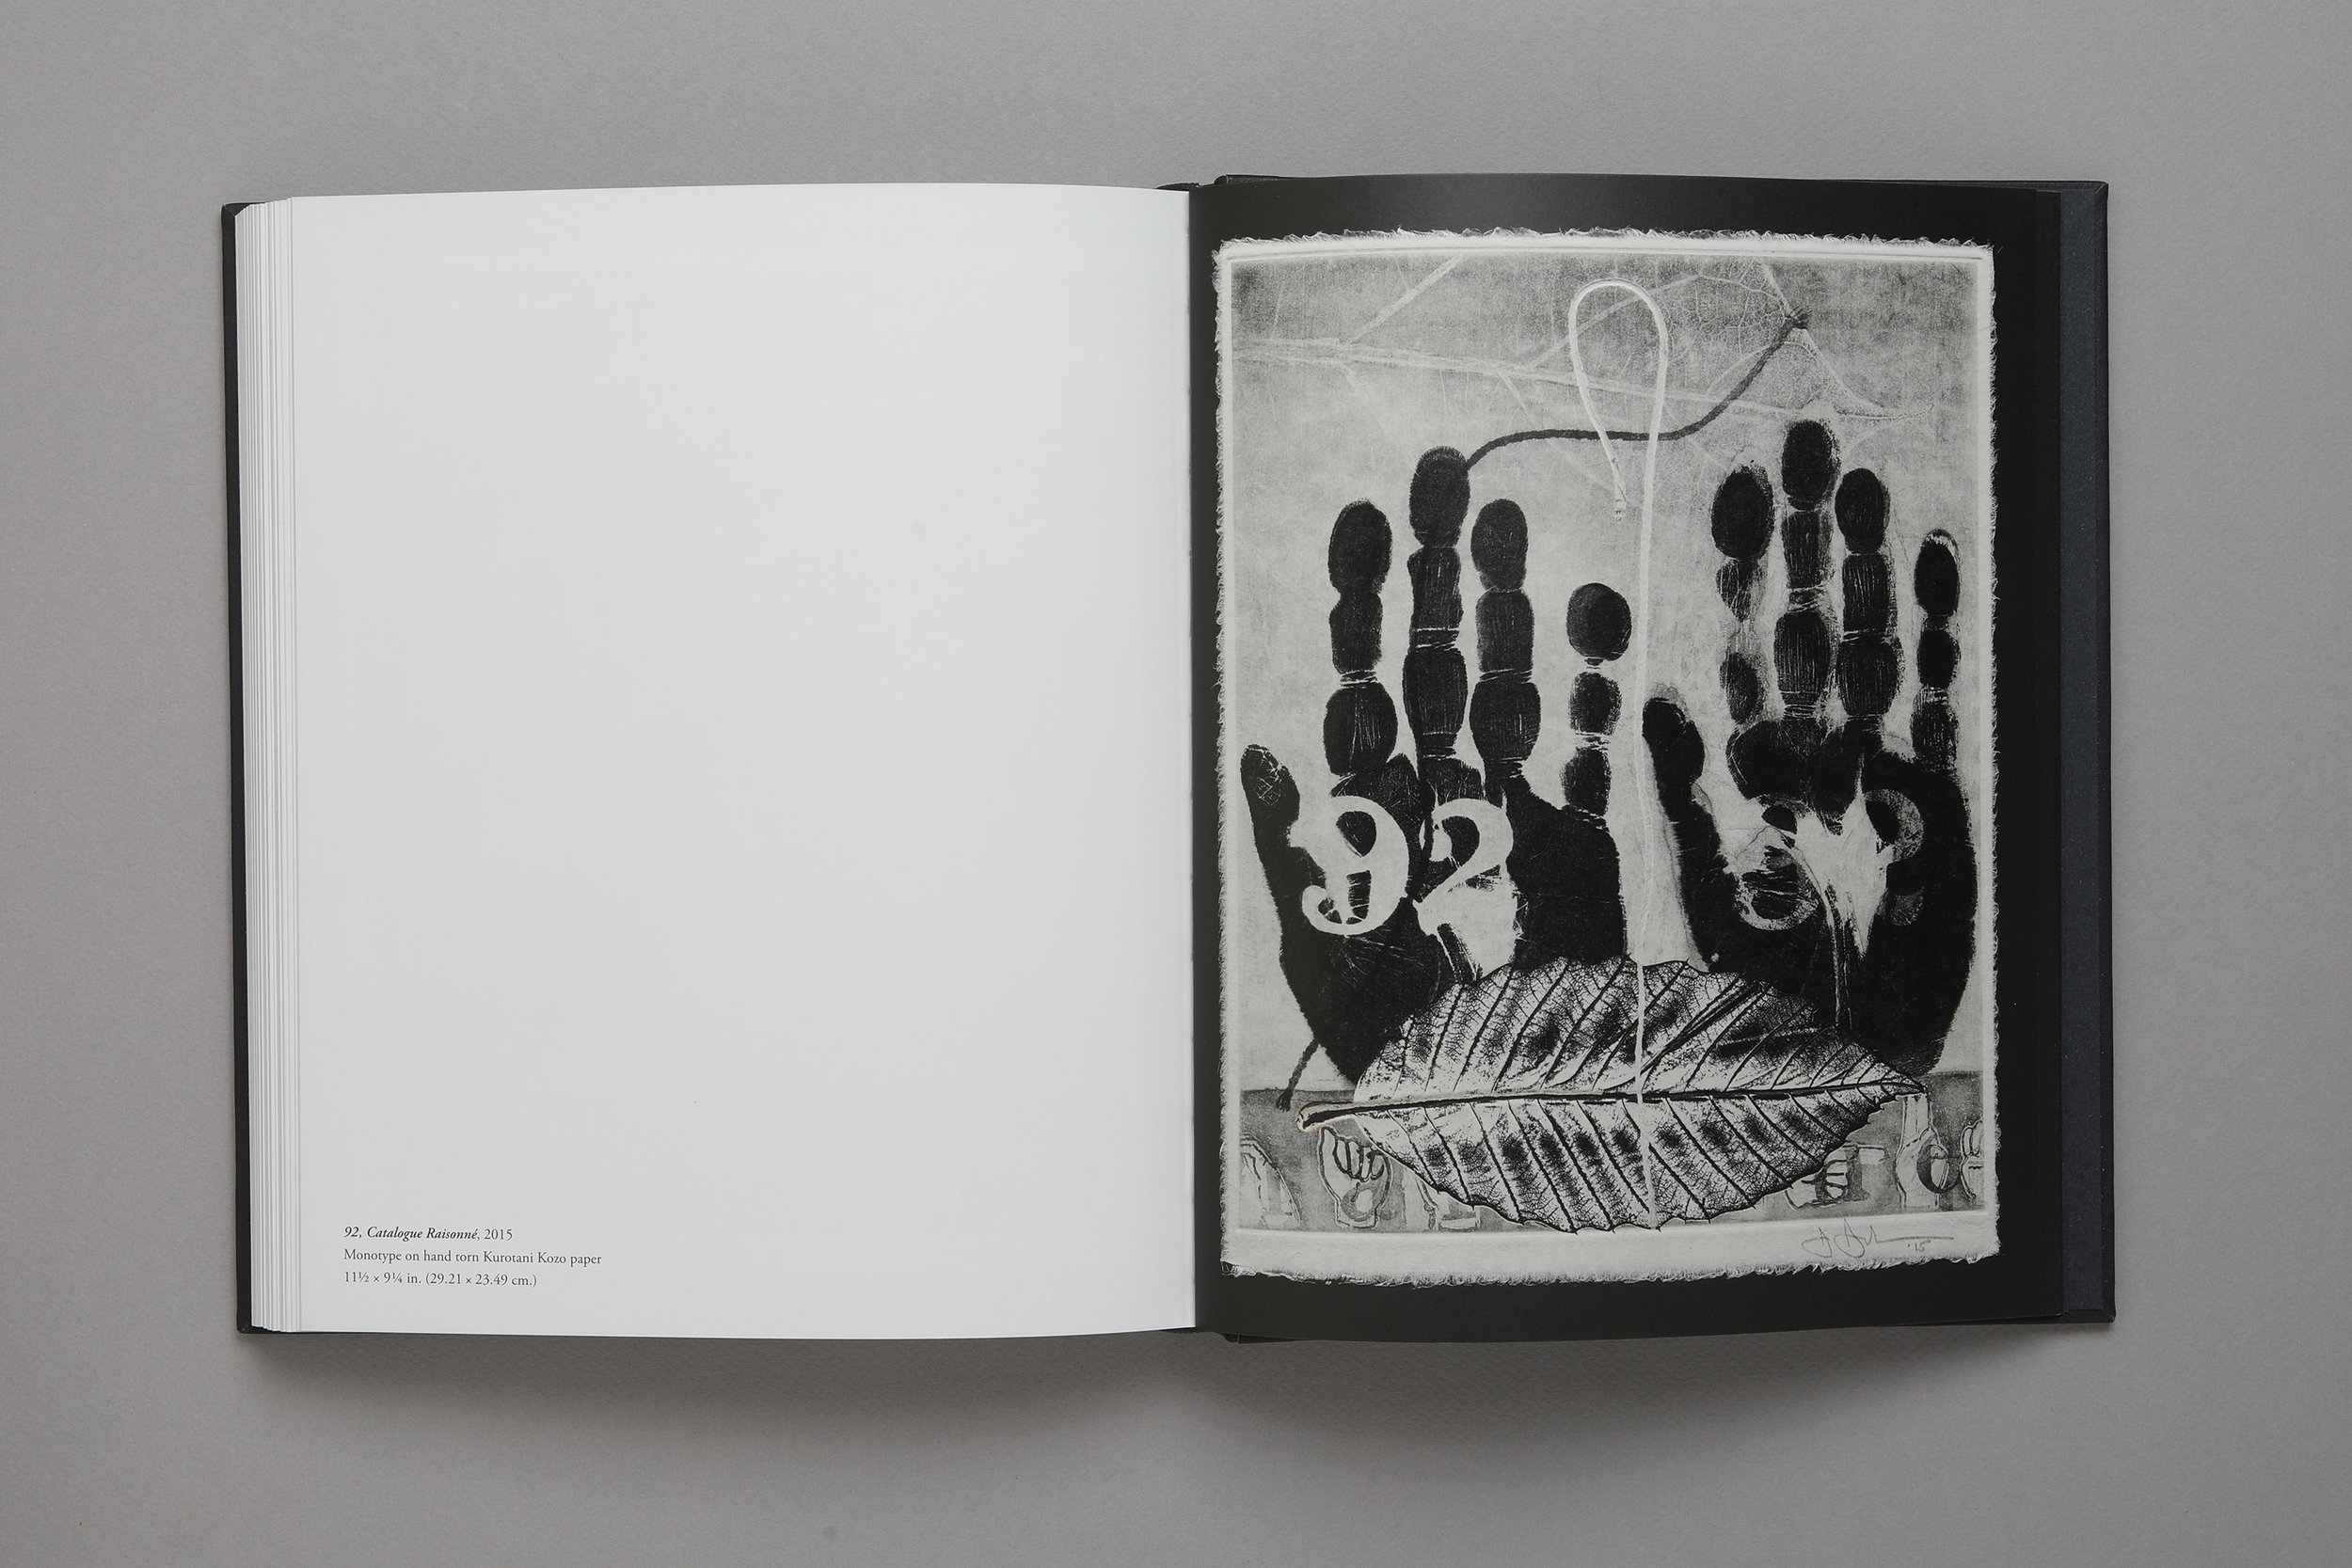  Jasper Johns: The 100 Monotypes, Softcover, plate 92 